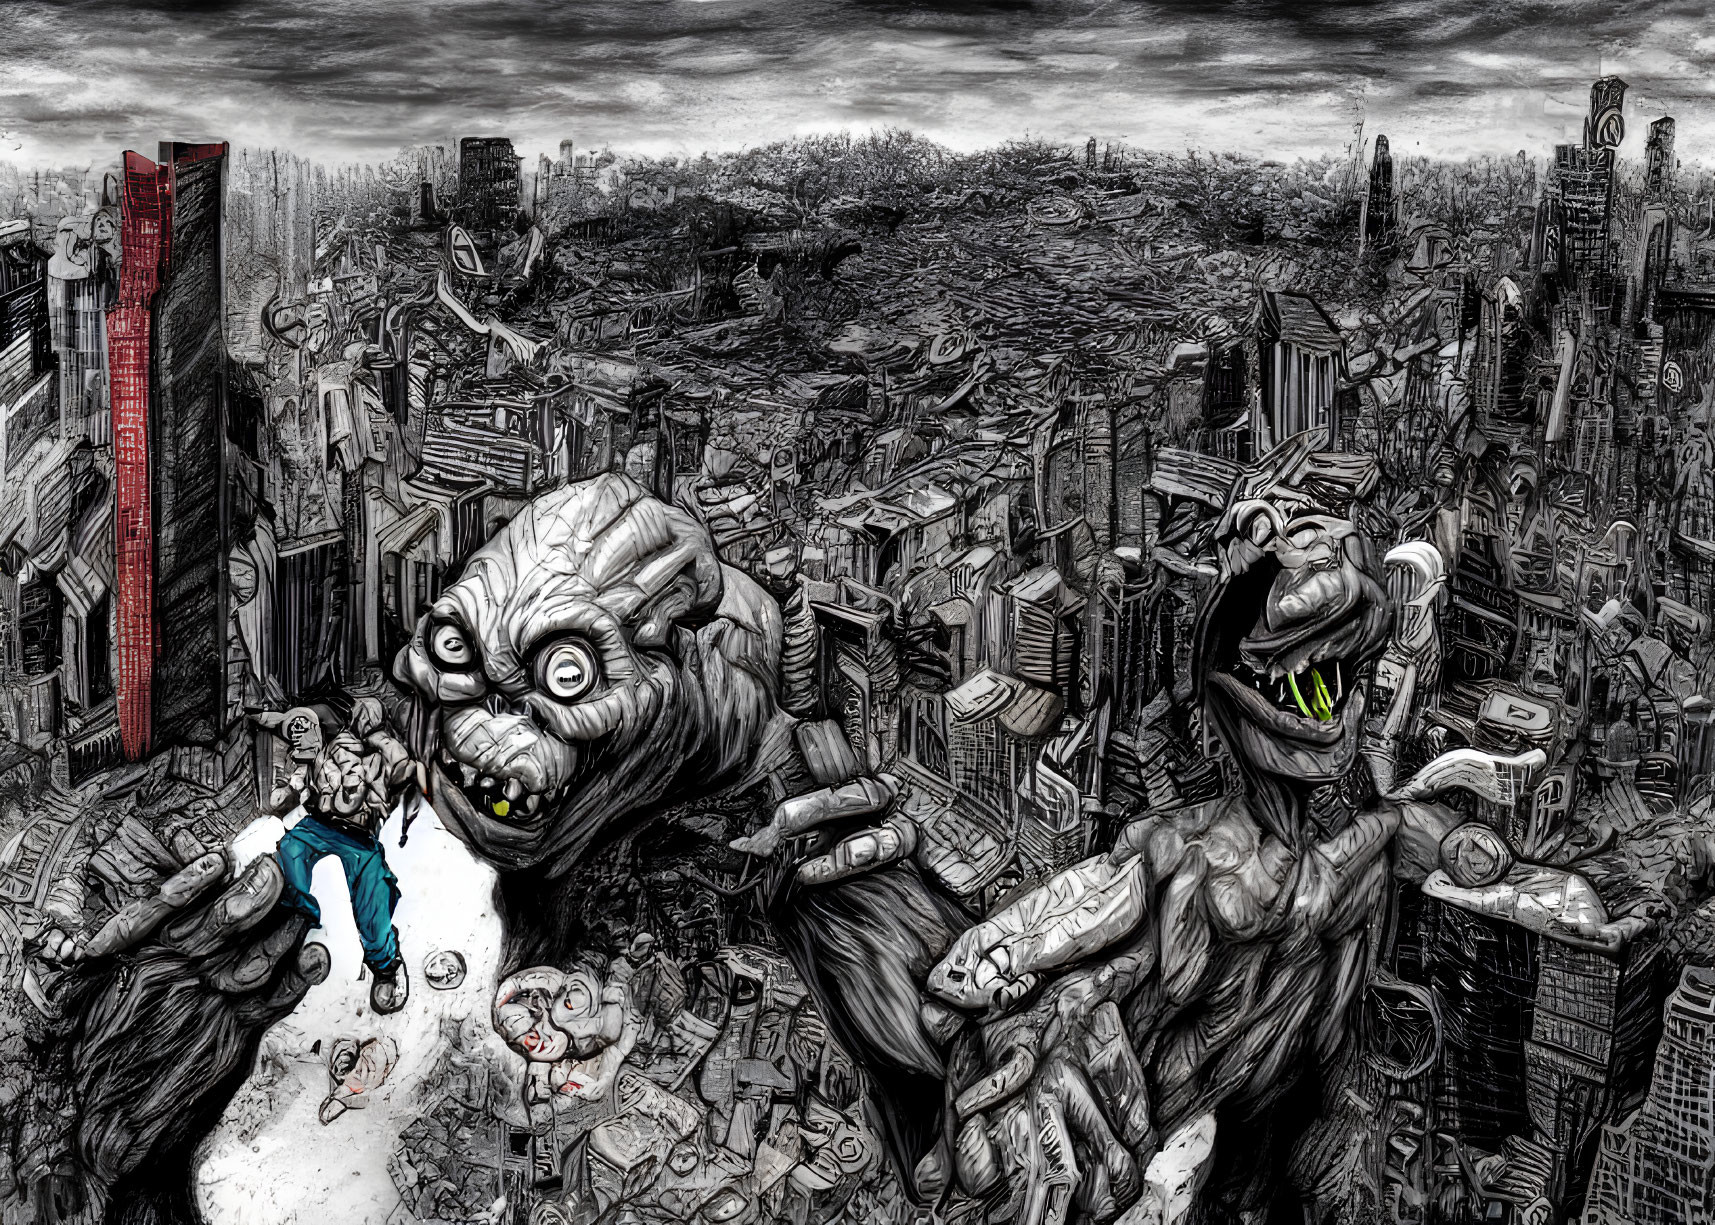 Monochrome dystopian cityscape with giant grotesque creatures and small figure